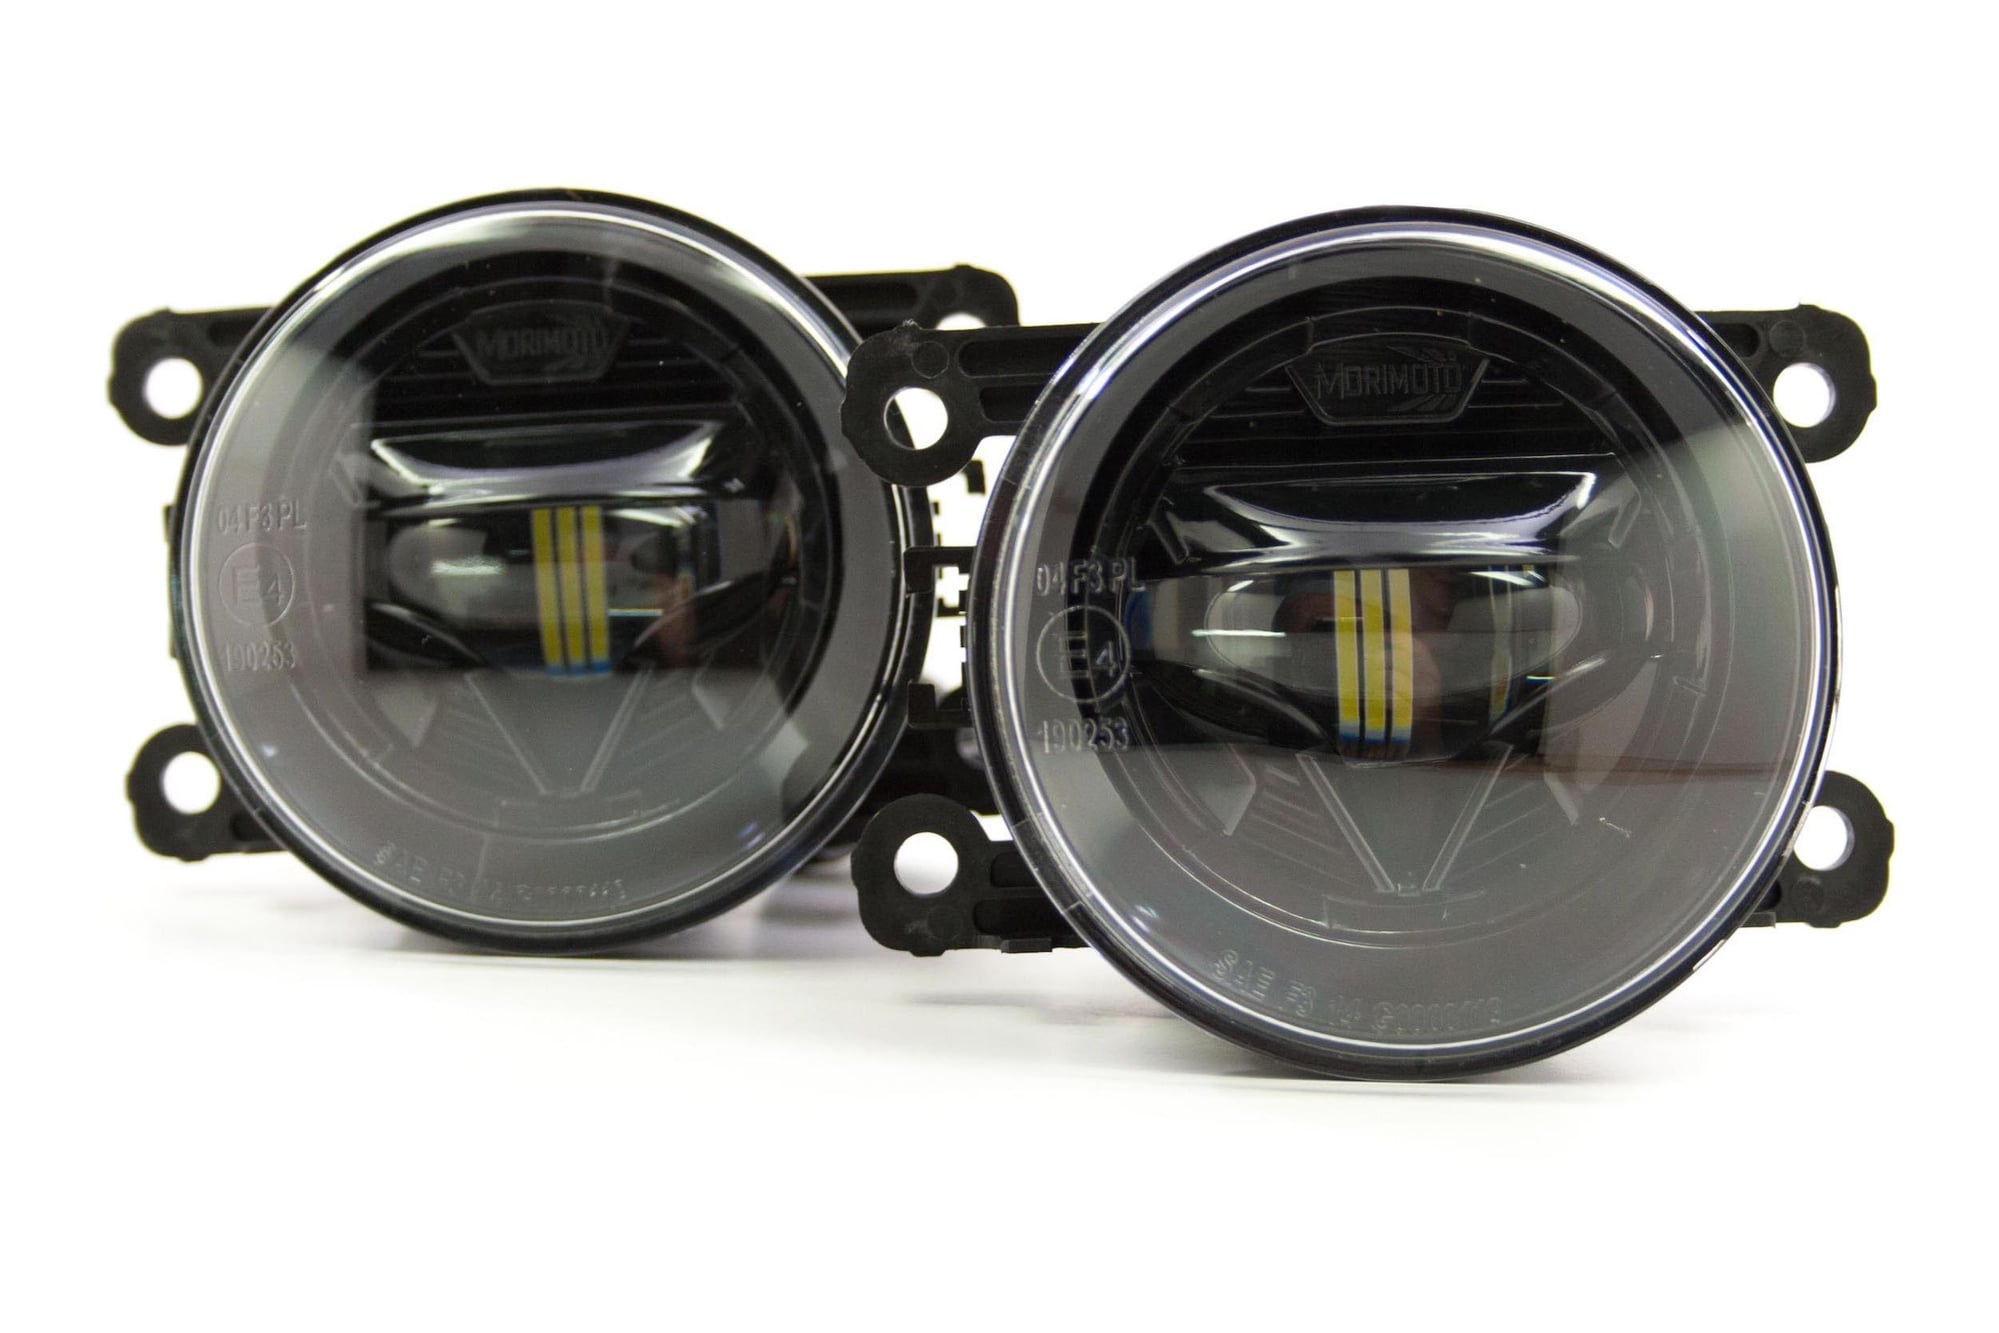 Lights - SOLD: MORIMOTO XB LED Fog Lights - New - 2012 to 2014 Acura TL - 2010 to 2018 Acura All Models - 2012 to 2014 Honda CR-V - 2010 to 2018 Honda All Models - 2010 to 2018 Nissan All Models - 2010 to 2018 Ford All Models - 2010 to 2018 Fiat All Models - 2010 to 2018 Land Rover All Models - Riverdale, NY 10463, United States